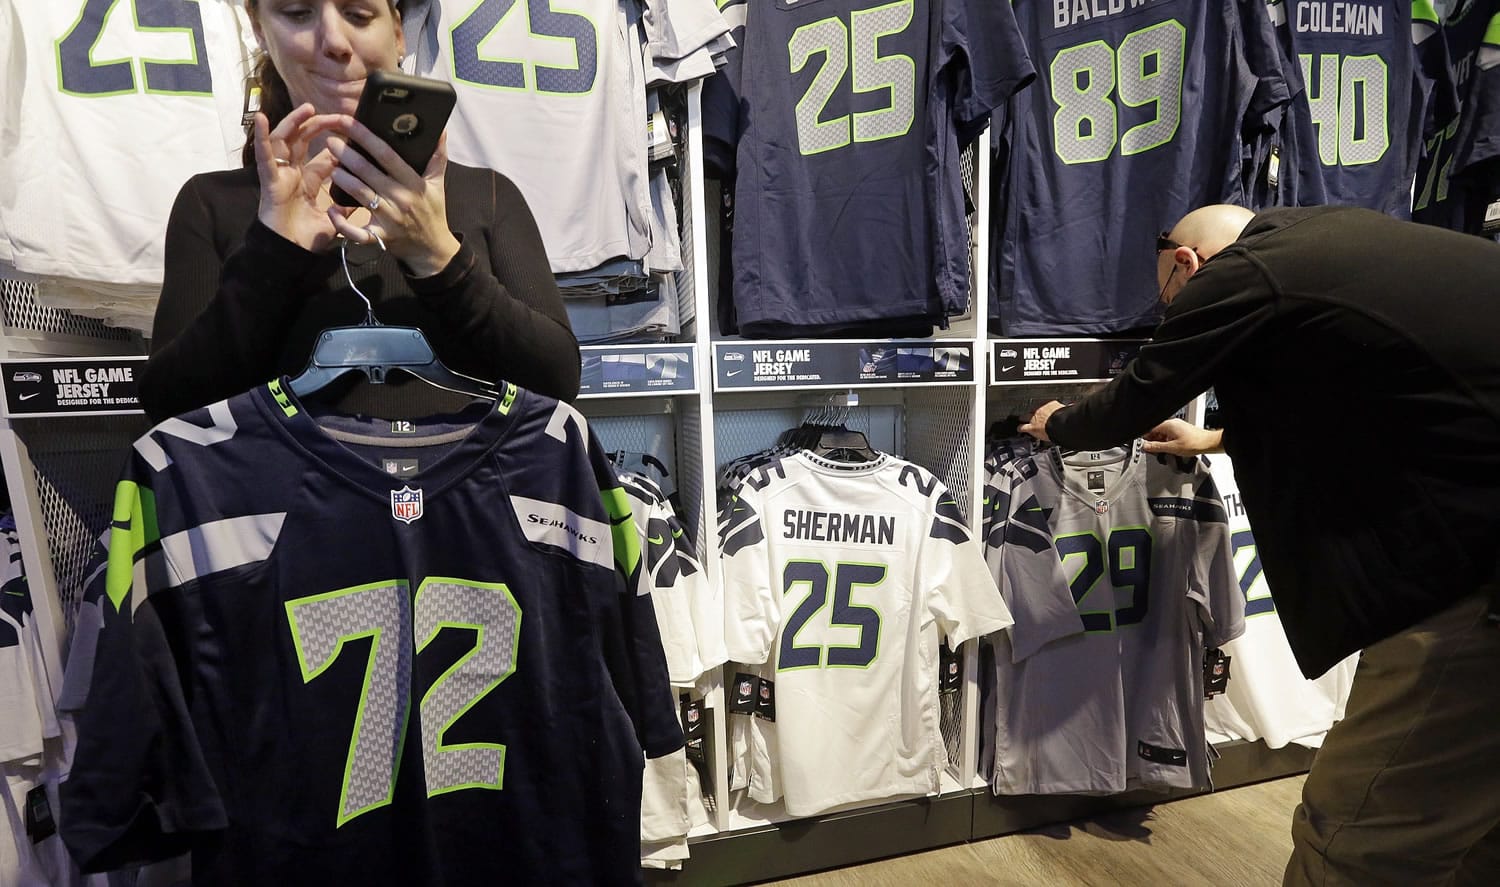 A couple of days out from the Seattle Seahawks winning the NFC championship on their way to the Super Bowl, Erin Rempel-Cheuk, left, calls her husband Tuesday in Seattle, to check on the jerseys he wants for he and his friends who will be attending the Super Bowl.